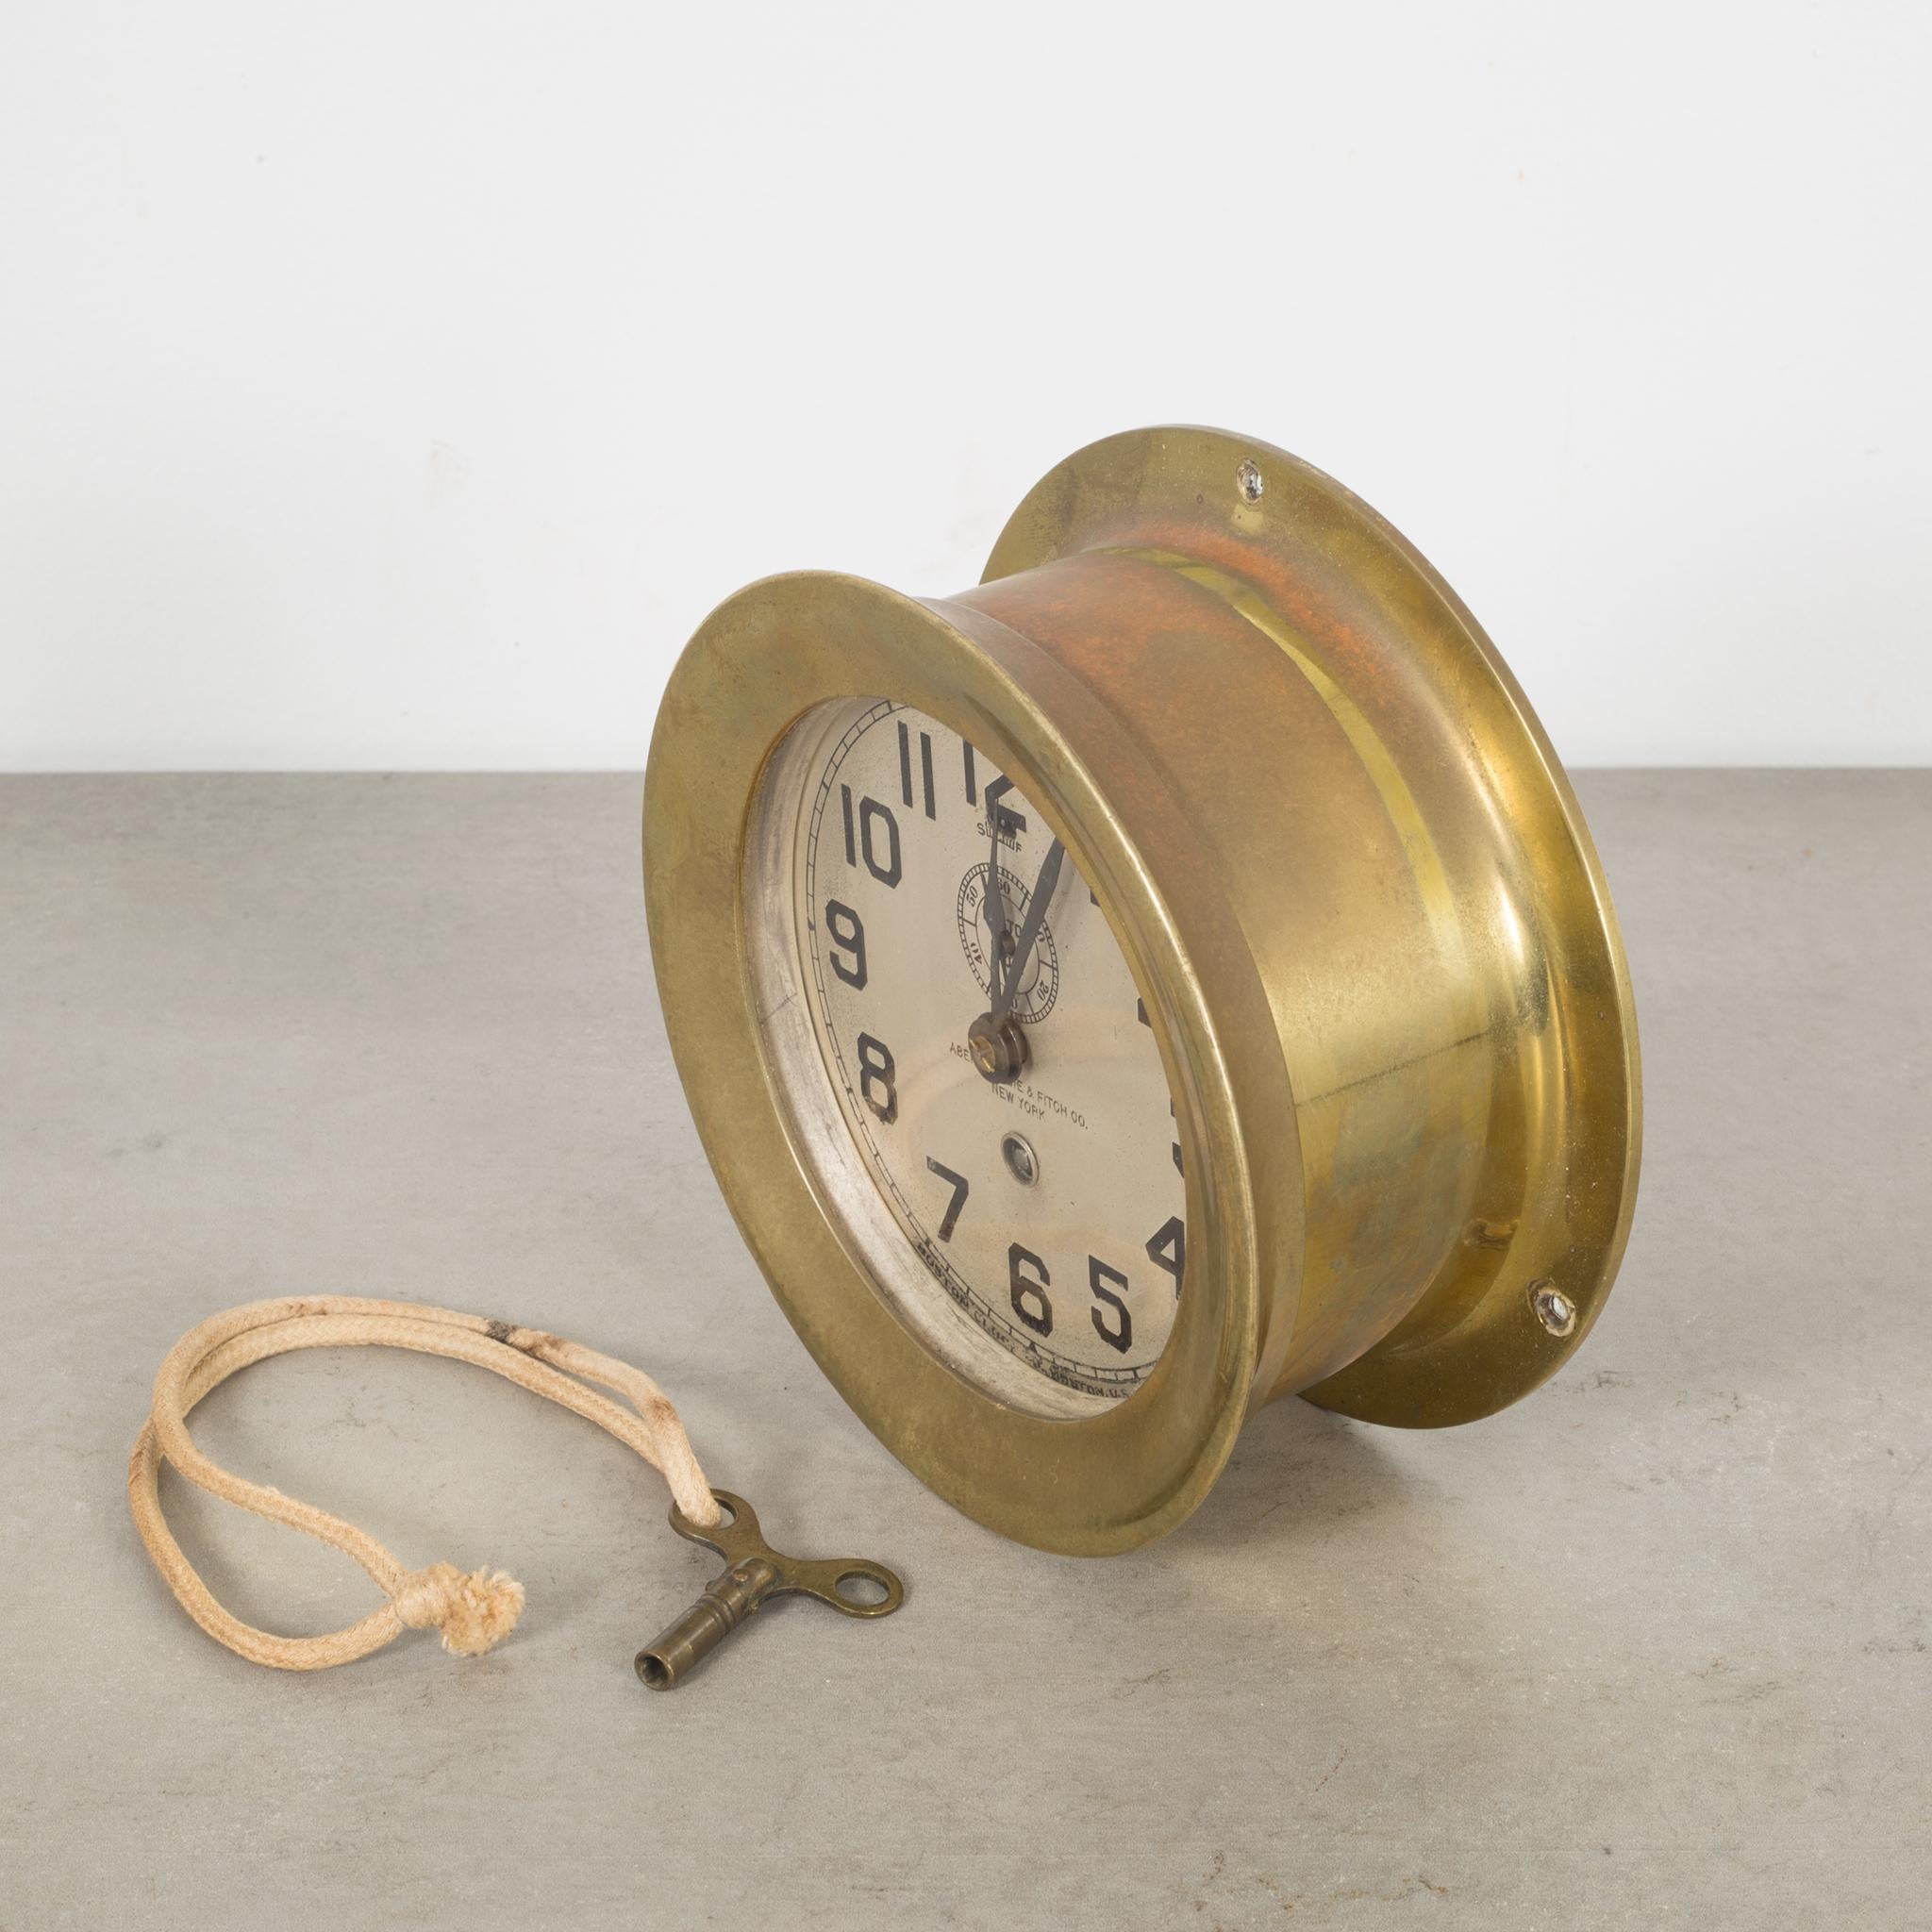 About

This is a brass Boston 8 Day clock with second hand and original key manufactured by Chelsea Clock Company for Abercrombie and Fitch Co. The face is metal with enameled numbers. The inside movement is not brass. The top unscrews for